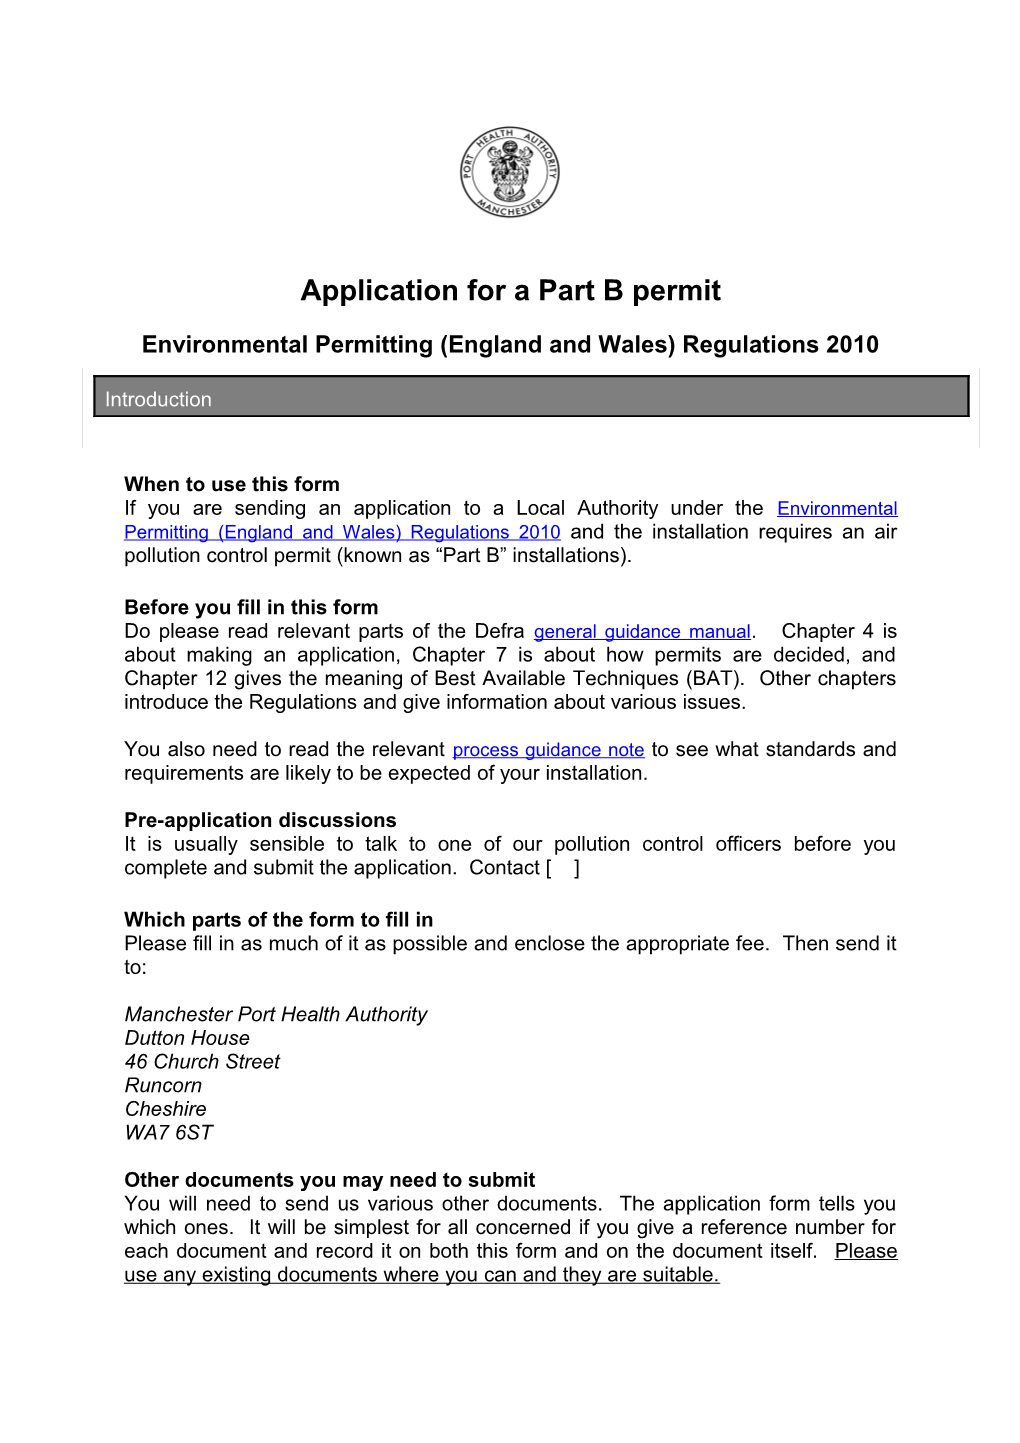 Application for a Part B Permit